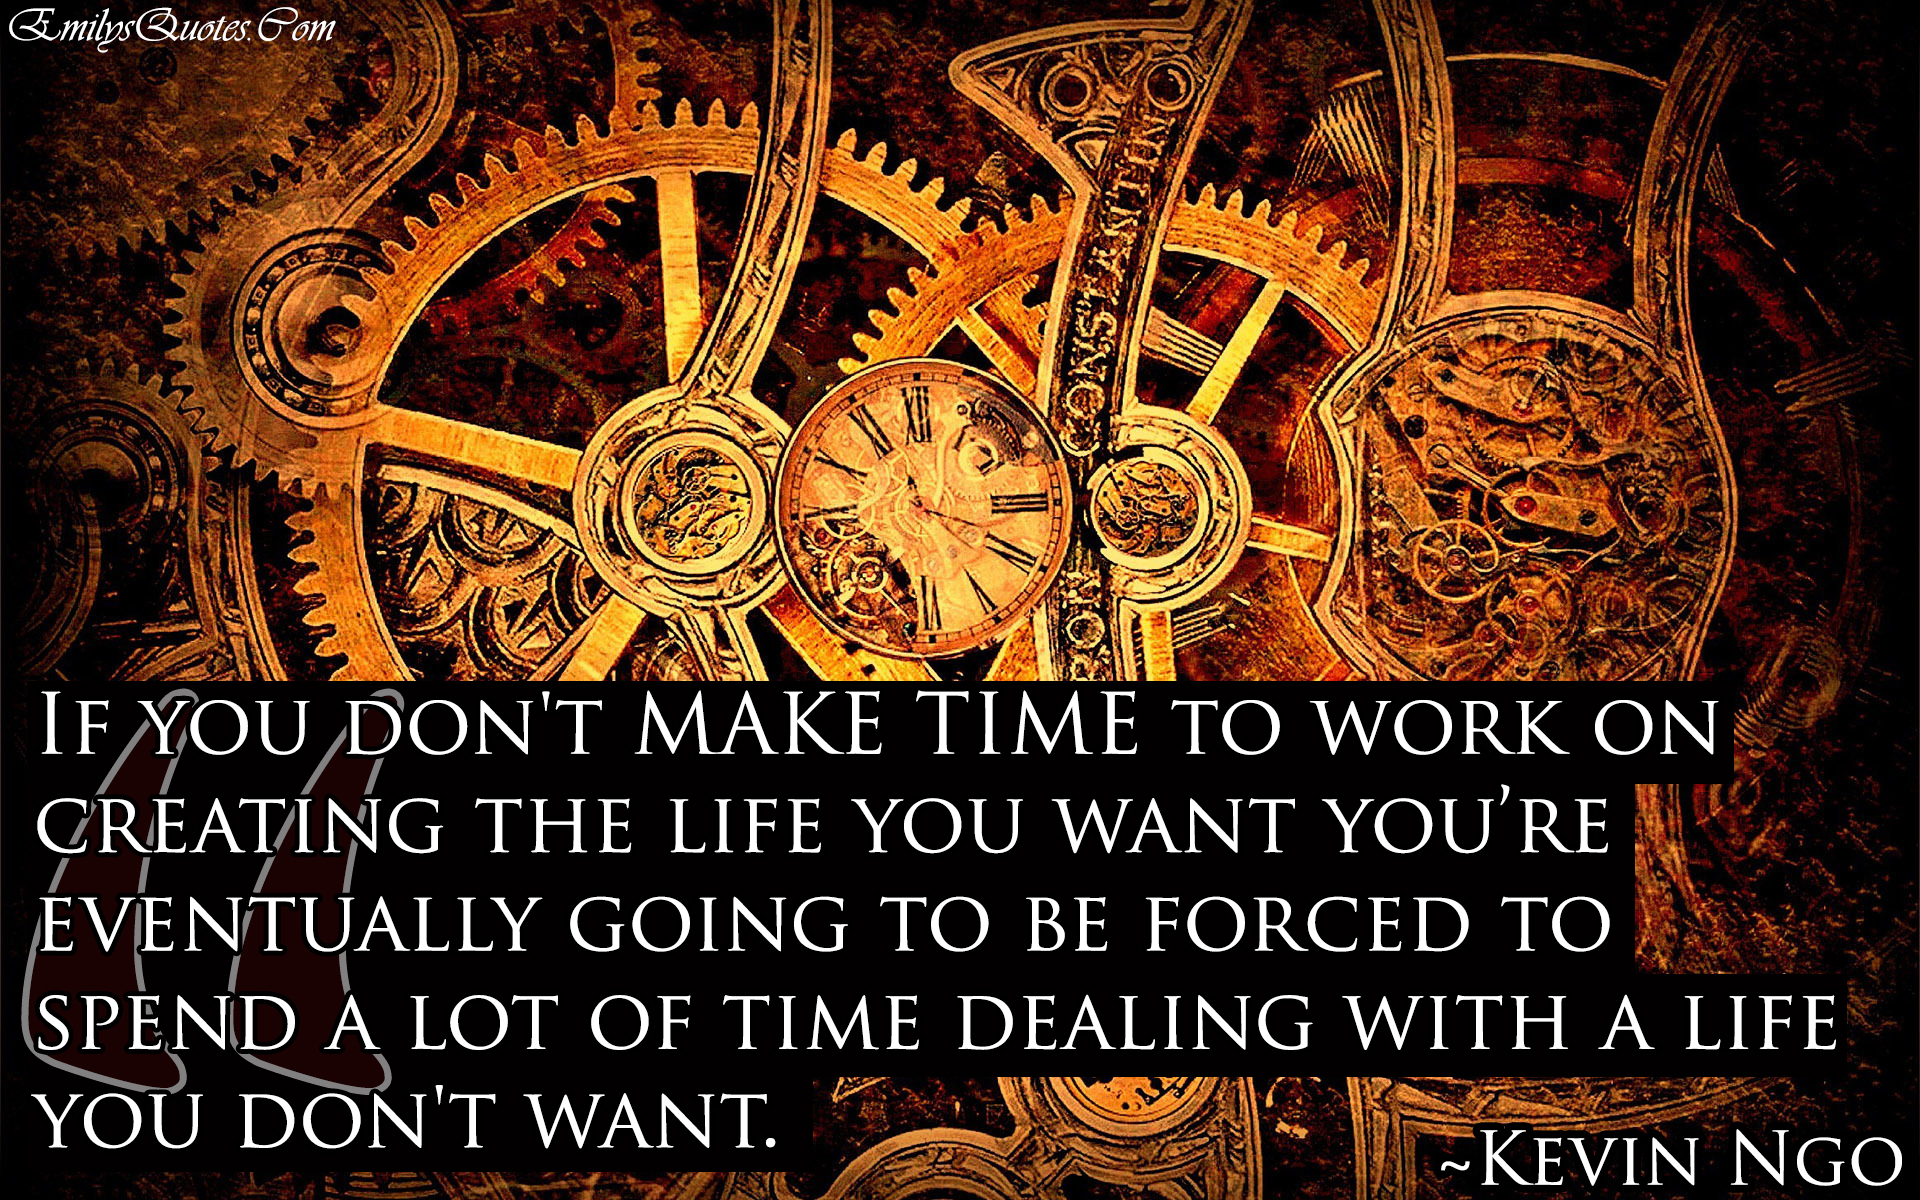 If you don’t MAKE TIME to work on creating the life you want you’re eventually going to be forced to spend a lot of time dealing with a life you don’t want